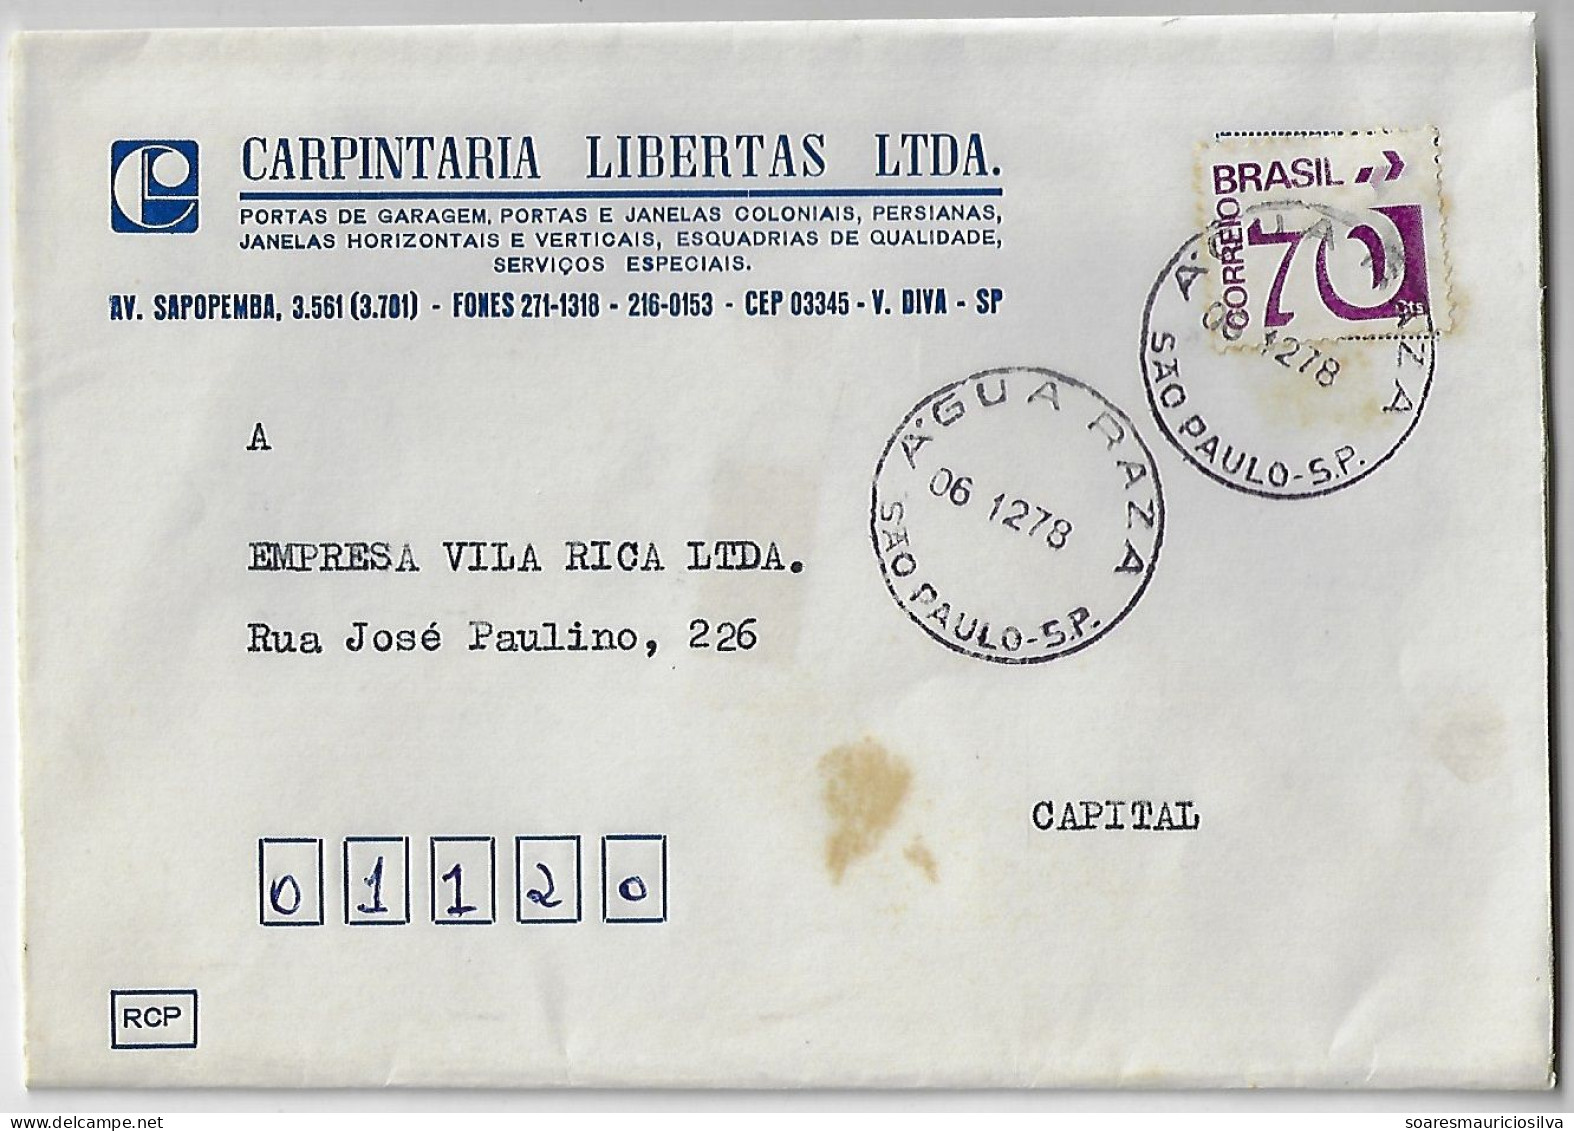 Brazil 1978 Carpentry Libertas Ltd Cover Shipped In São Paulo Agency Água Raza (shallow Water) Definitive Stamp 70 Cents - Lettres & Documents